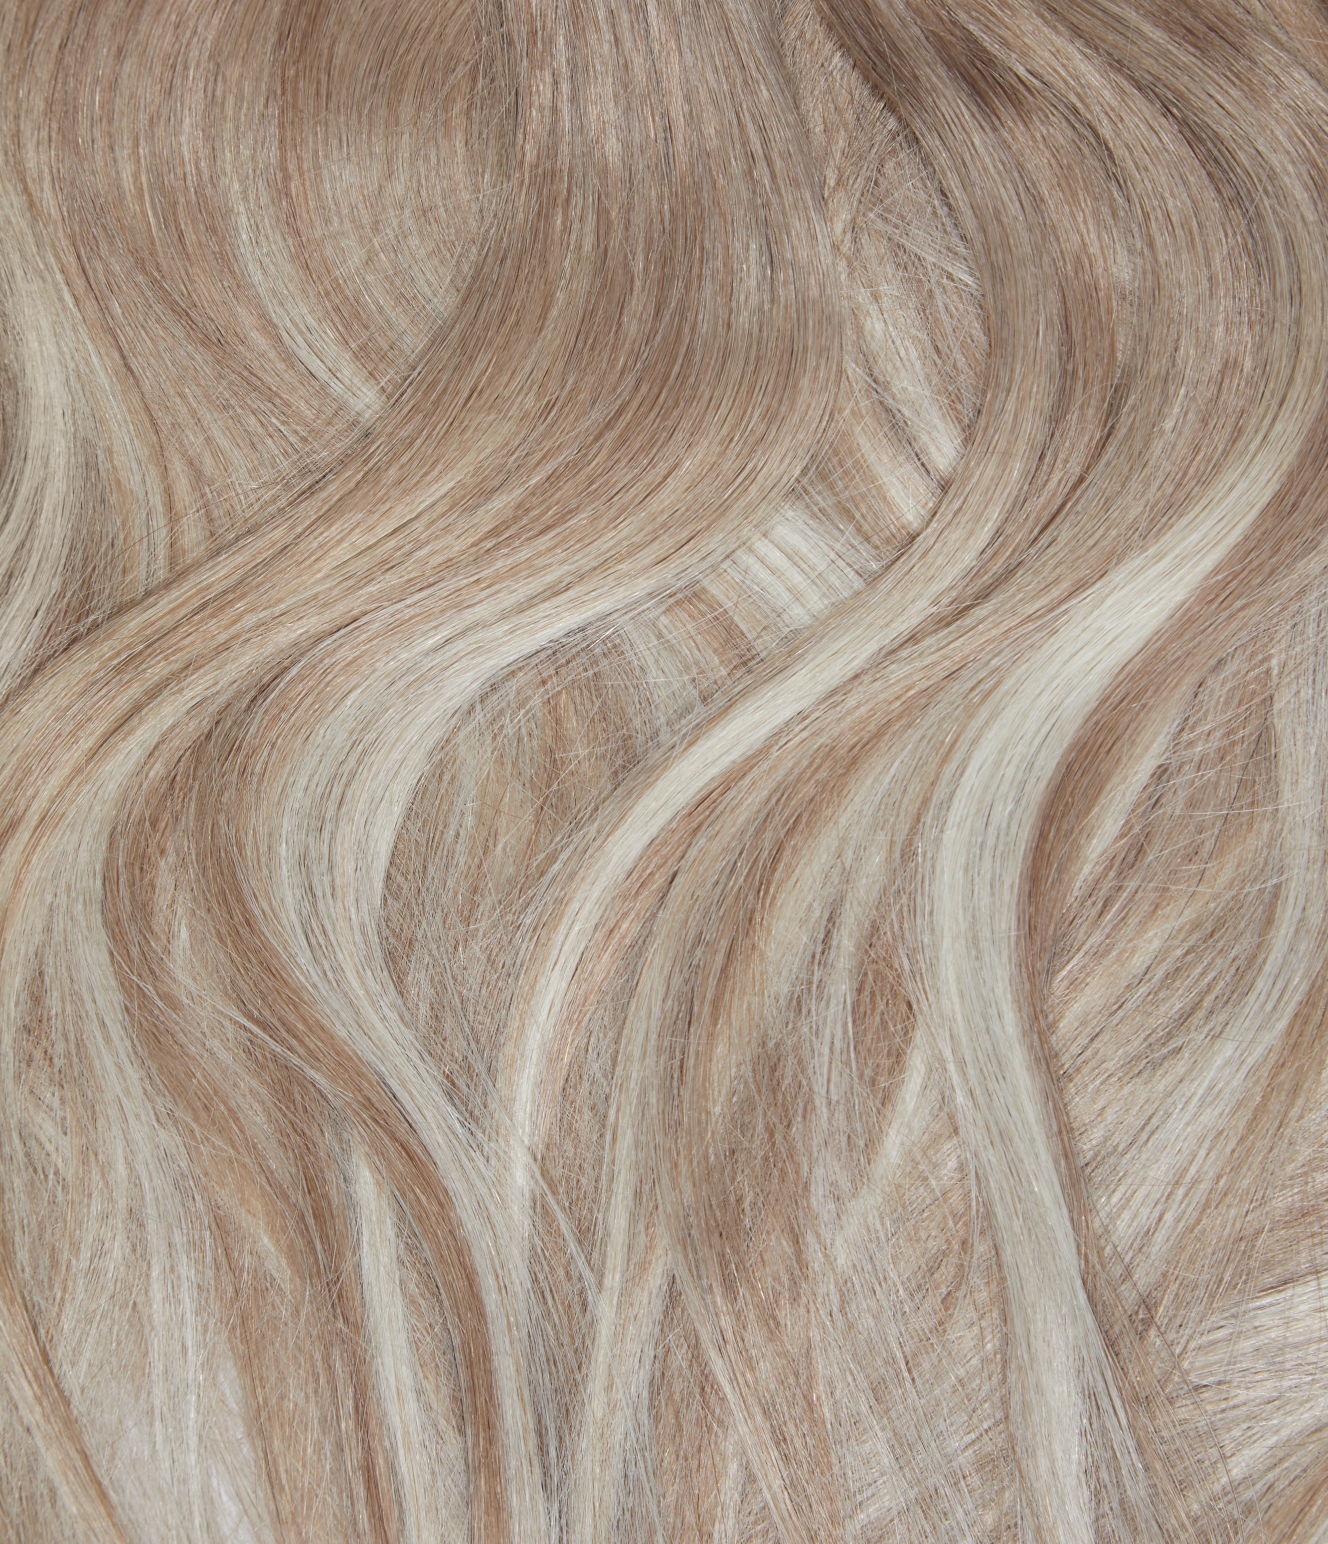 A close-up of blonde hair with highlights. There is a contrast between the lighter blonde and darker blonde strands, giving a multi-tonal effect to the hair.